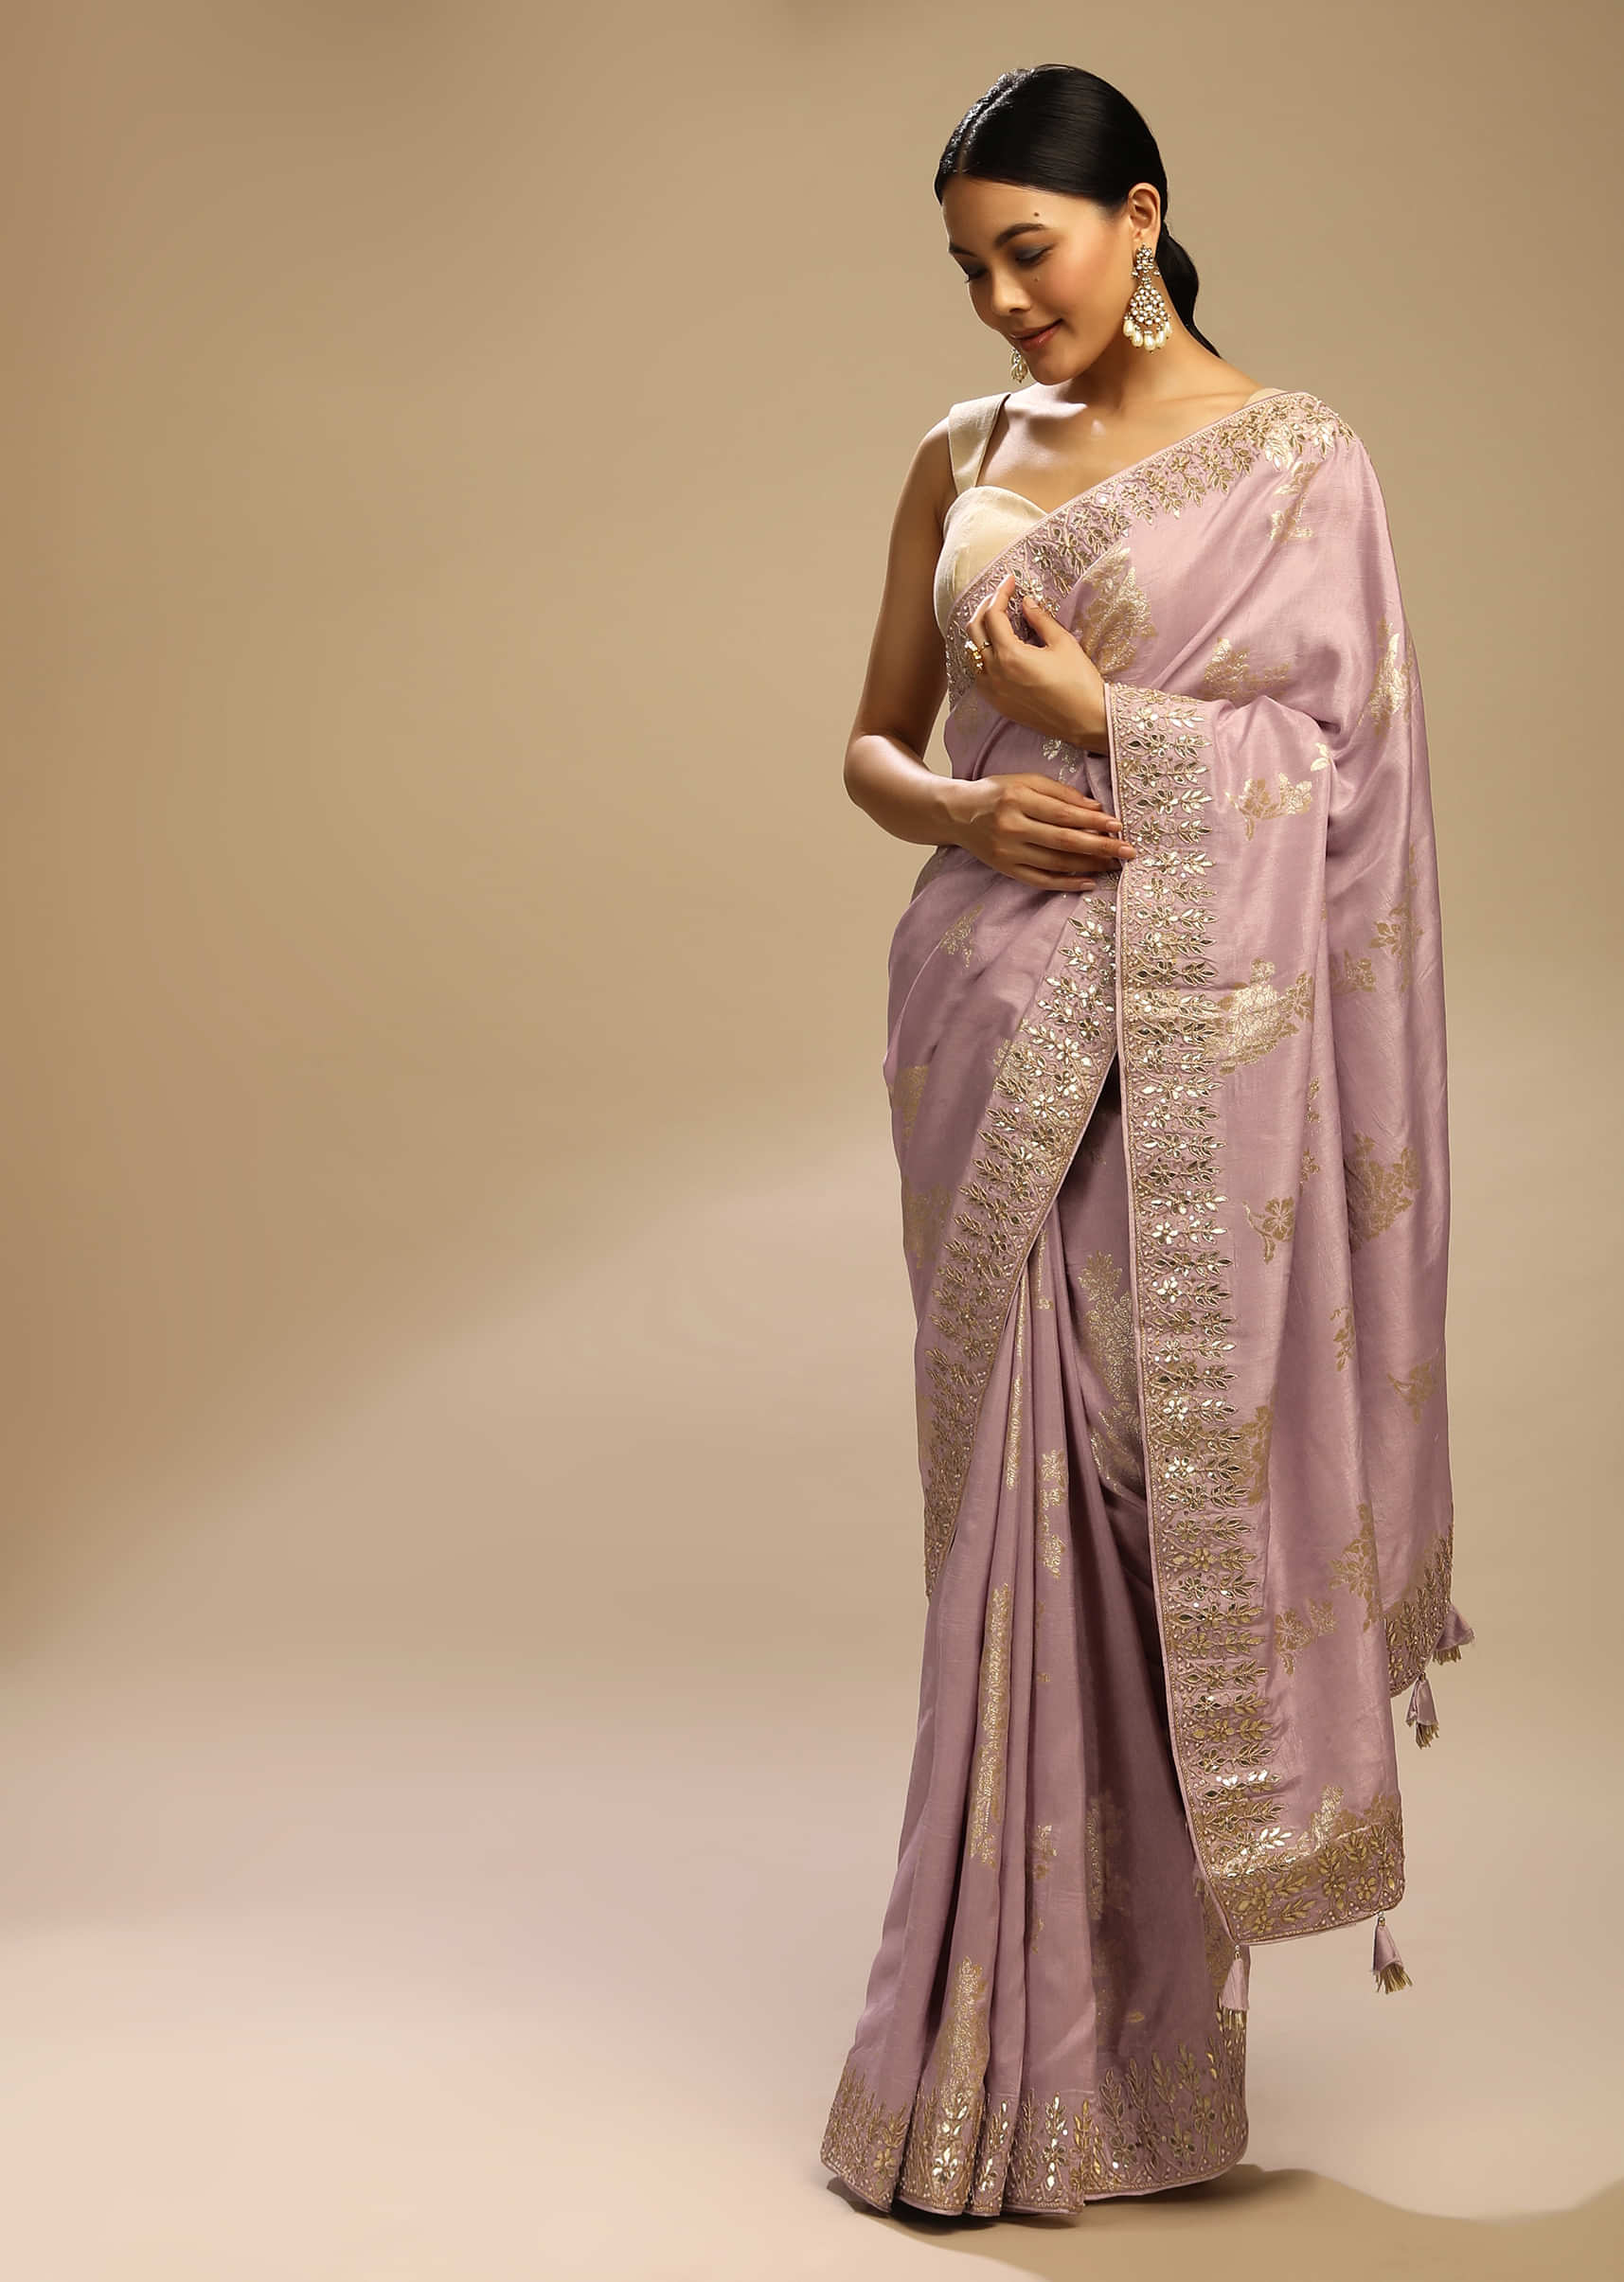 Mauve Shadows Saree In Dupion Silk With Woven Floral Motifs And Gotta Embroidered Floral Border